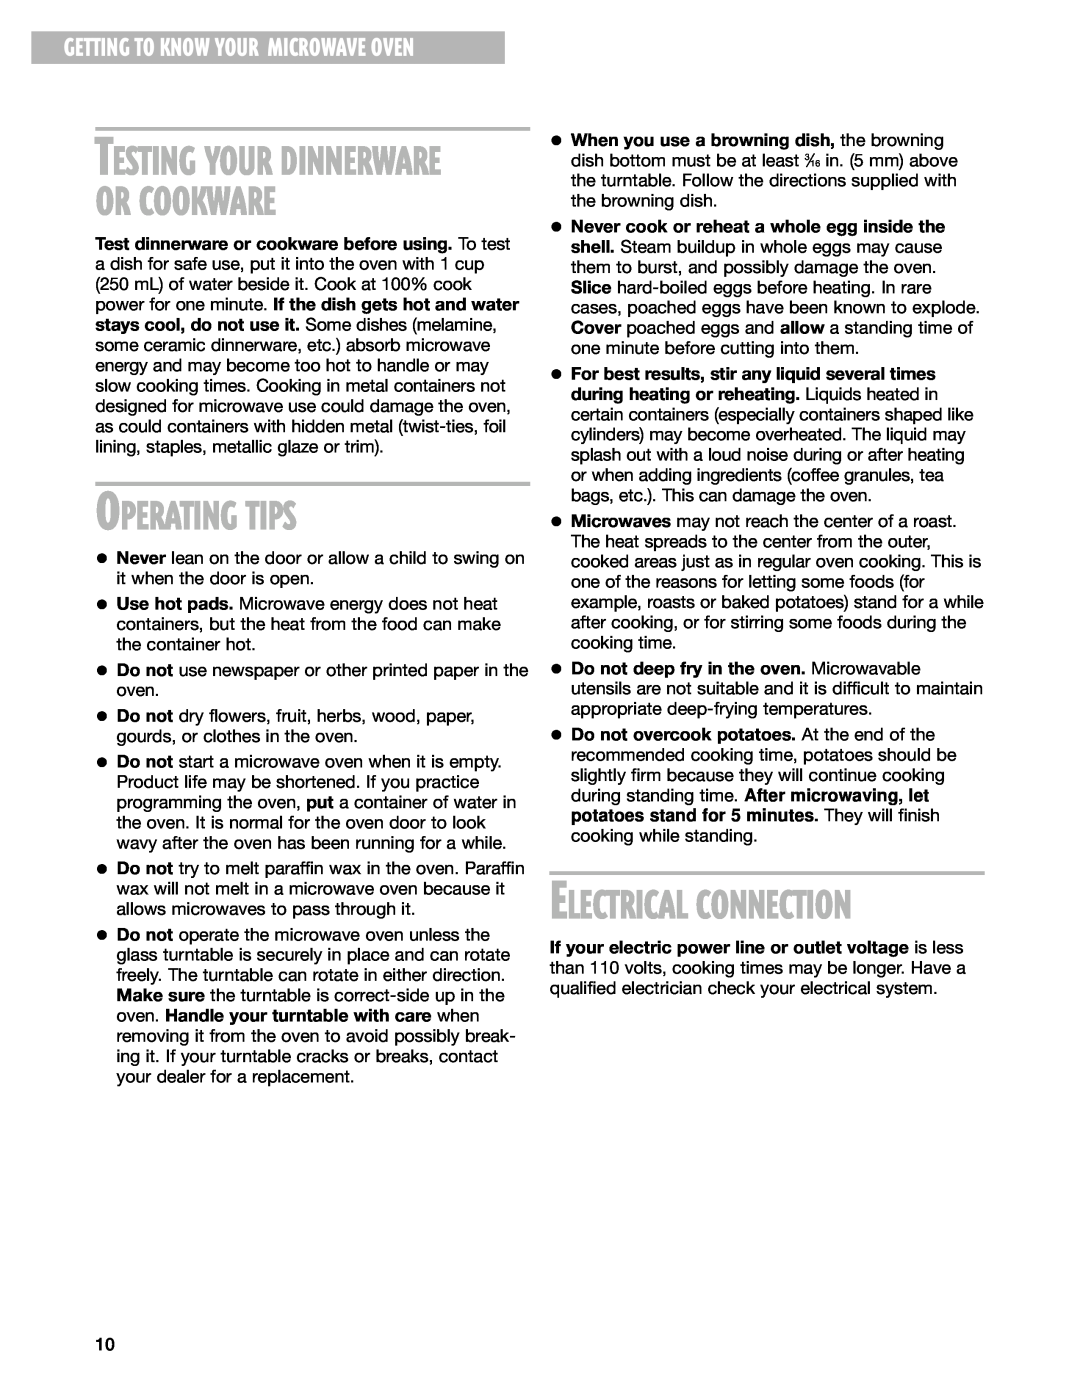 Whirlpool GM8155XJ installation instructions Or Cookware, Operating Tips, Electrical Connection, Testing Your Dinnerware 